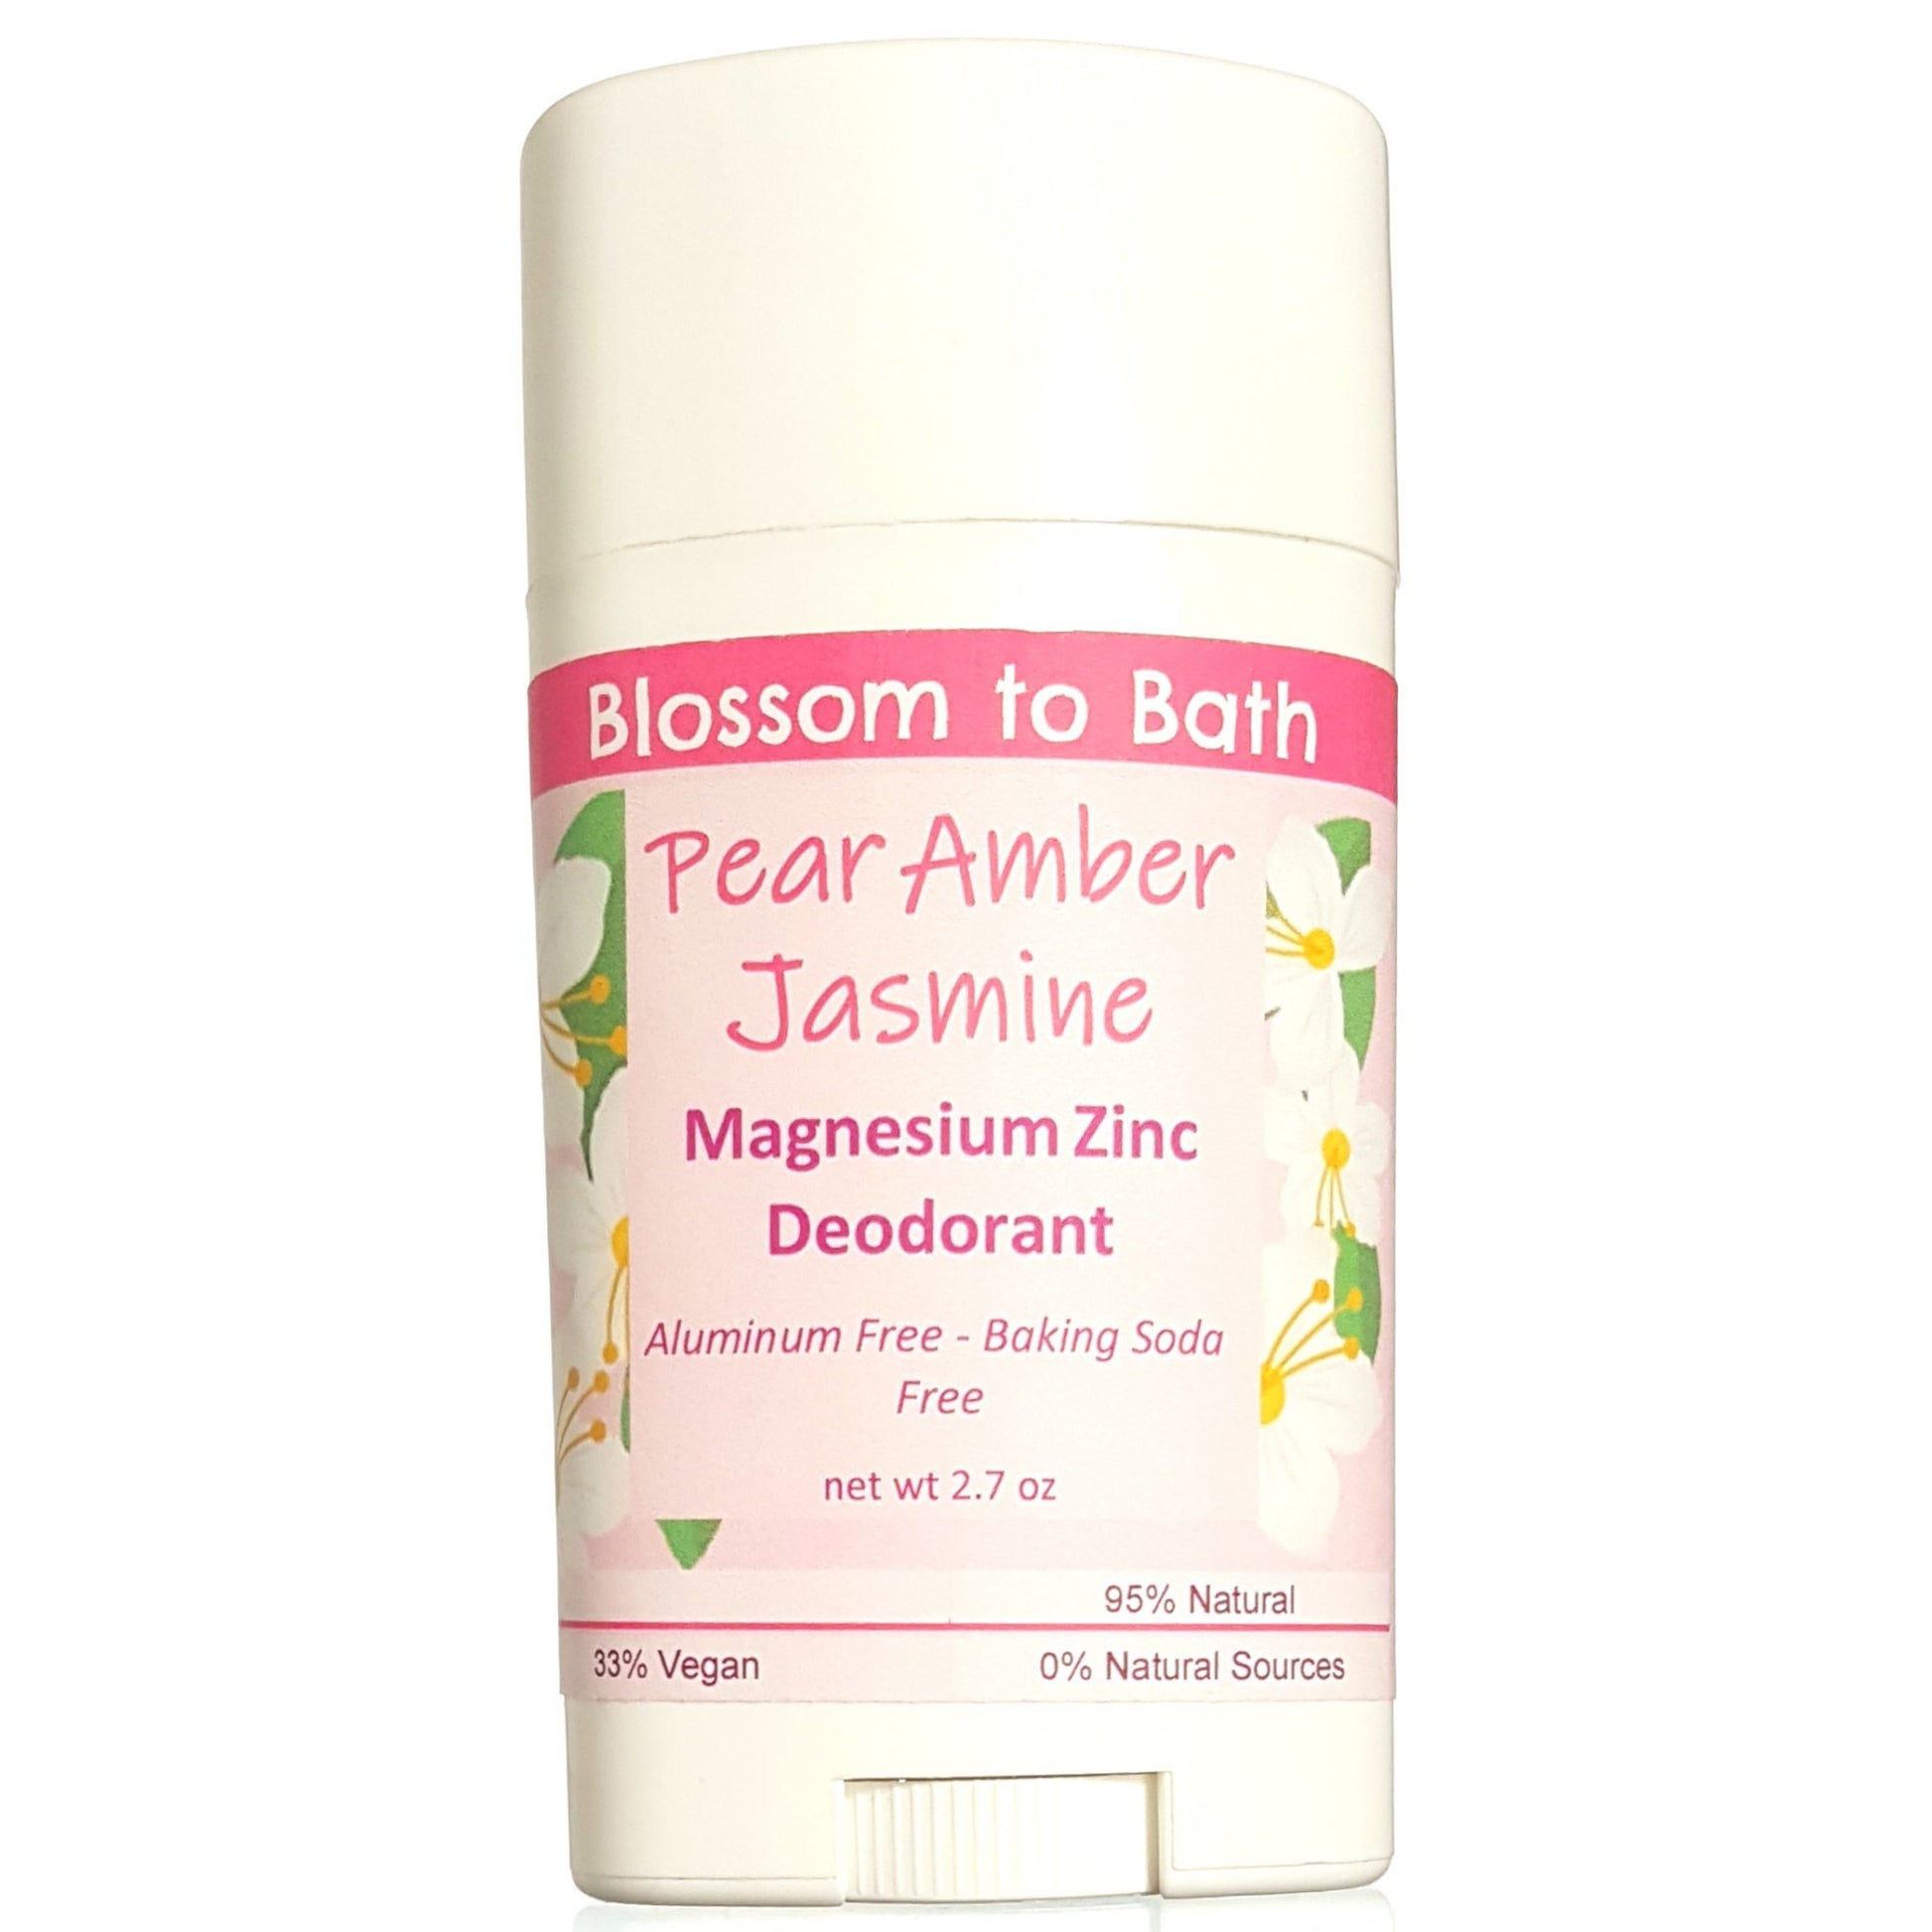 Buy Blossom to Bath Pear Amber Jasmine Magnesium Zinc Deodorant from Flowersong Soap Studio.  Long lasting protection made from organic botanicals and butters, made without baking soda, tested in the Arizona heat  A scent that lets you escape to an island paradise of pear, jasmine, and warm spices.